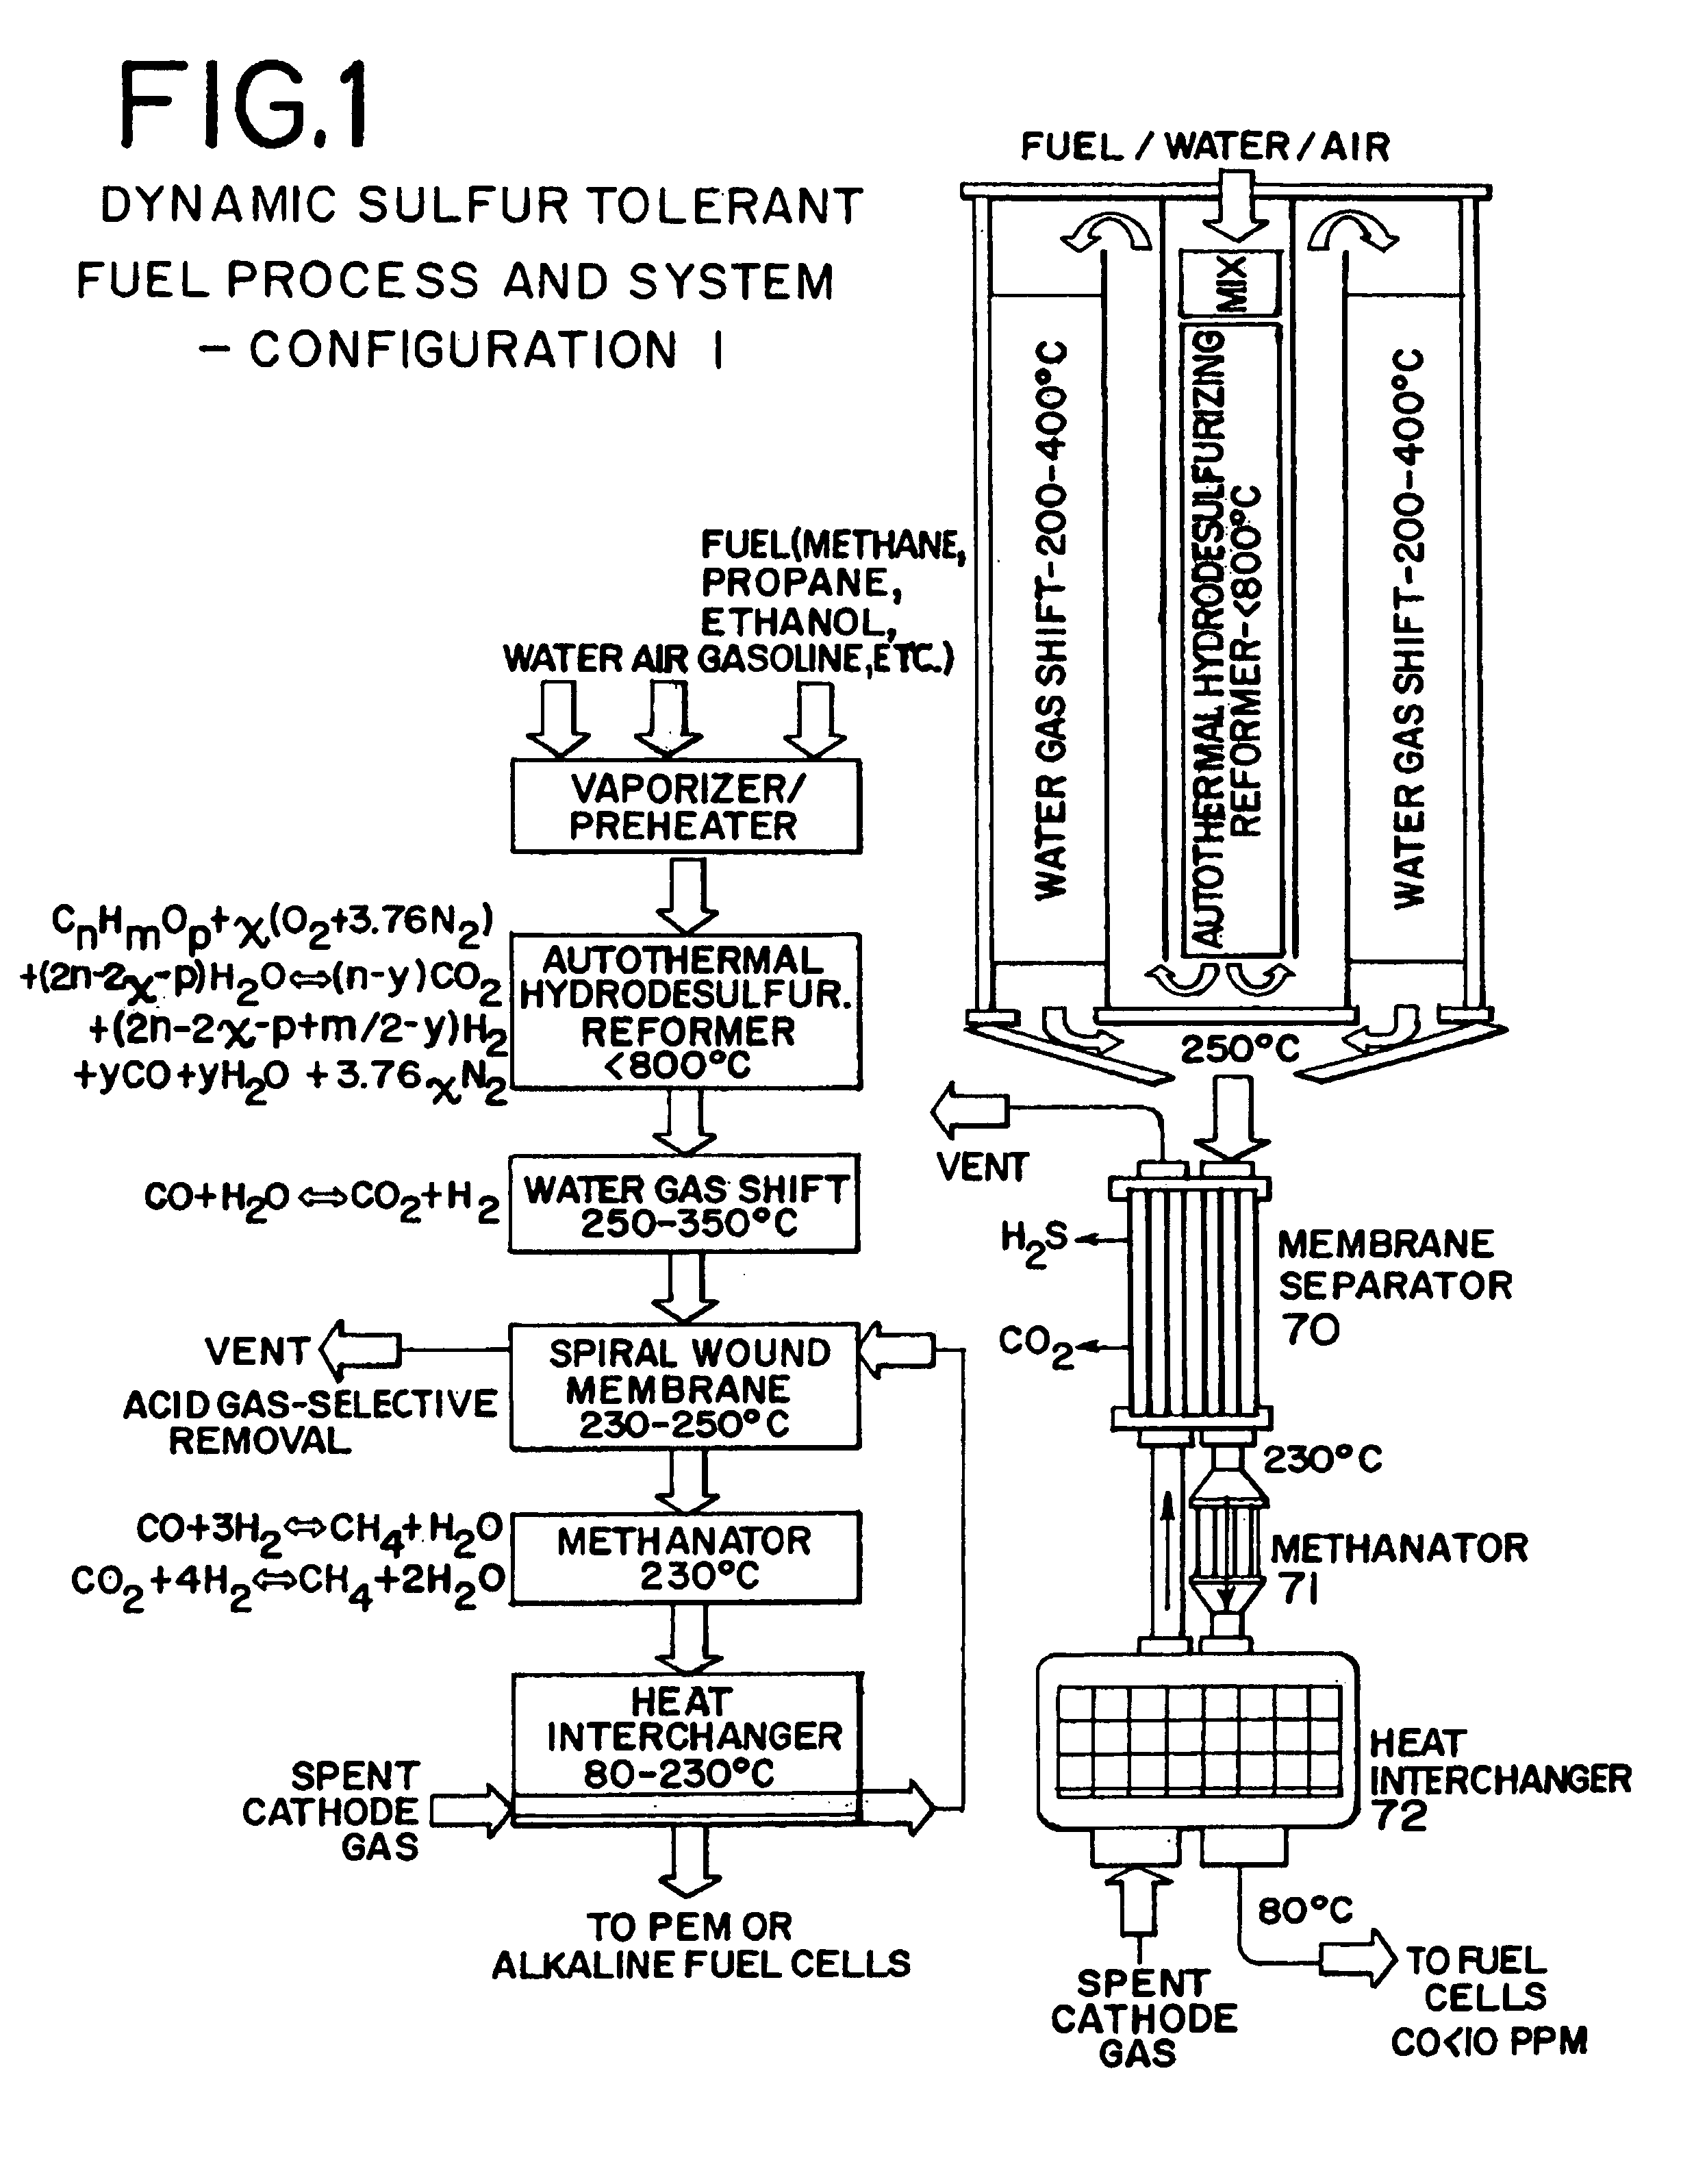 Dynamic sulfur tolerant process and system with inline acid gas-selective removal for generating hydrogen for fuel cells